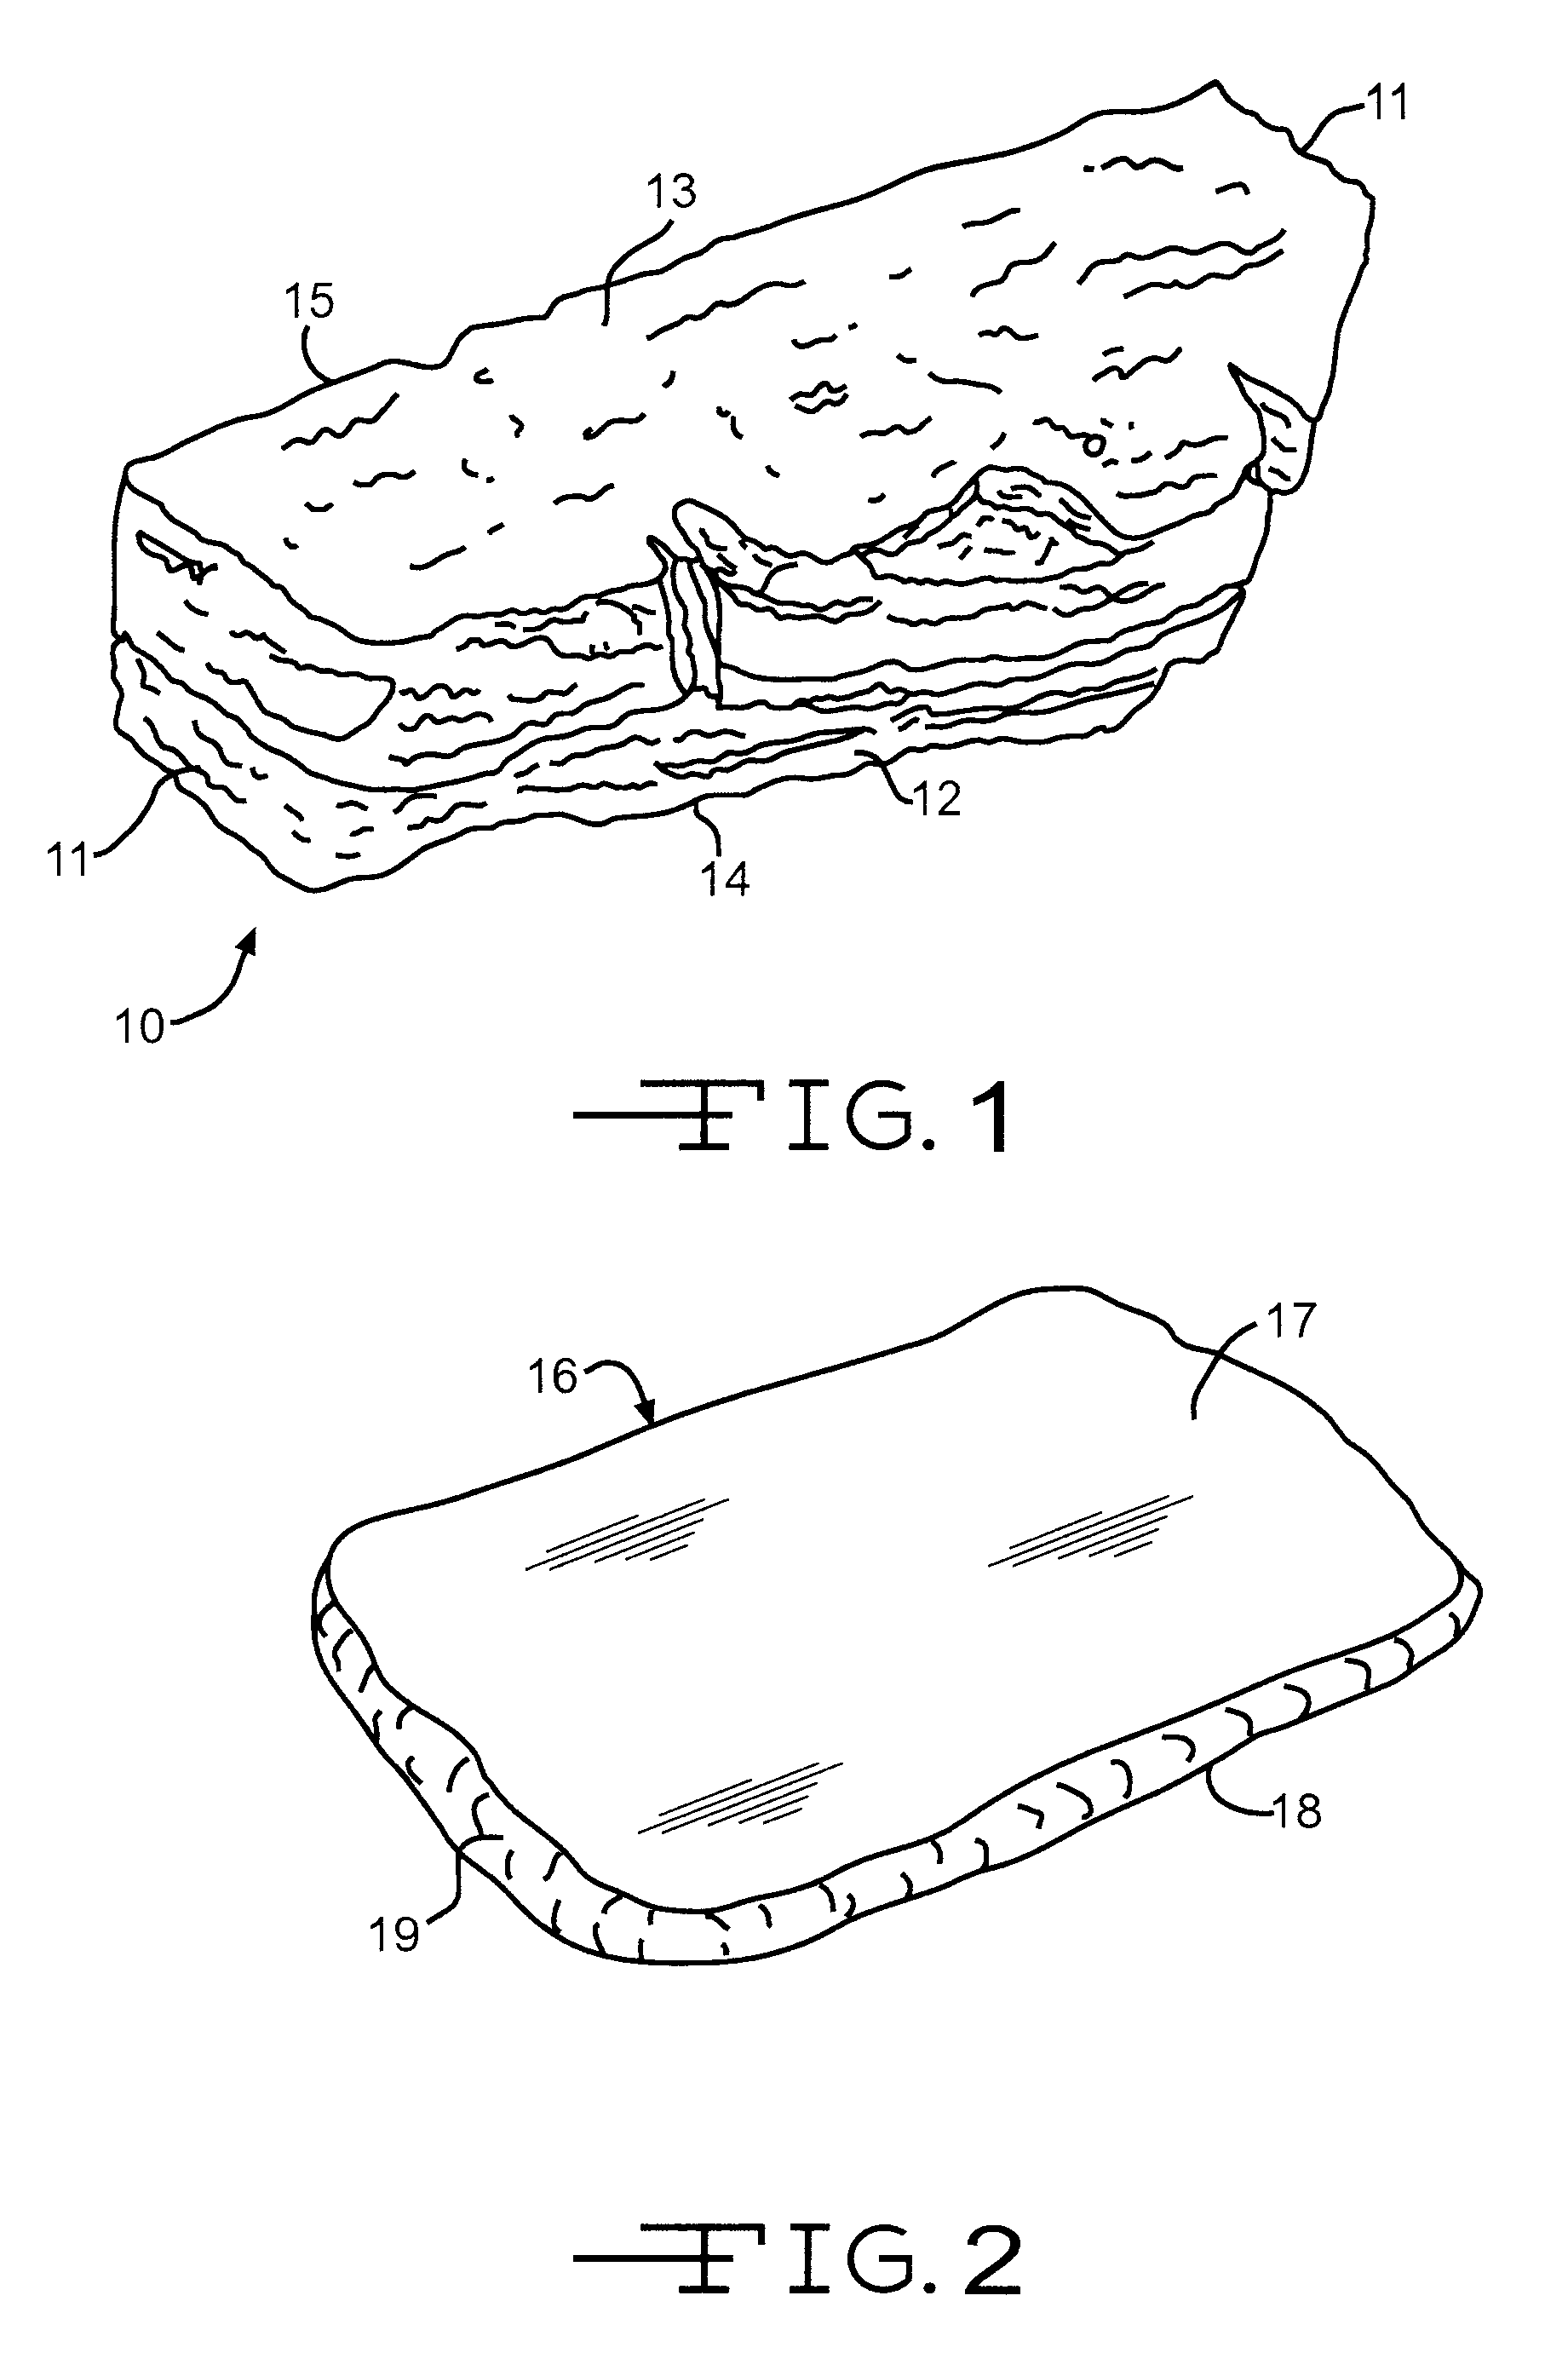 Method and apparatus for forming concrete blocks